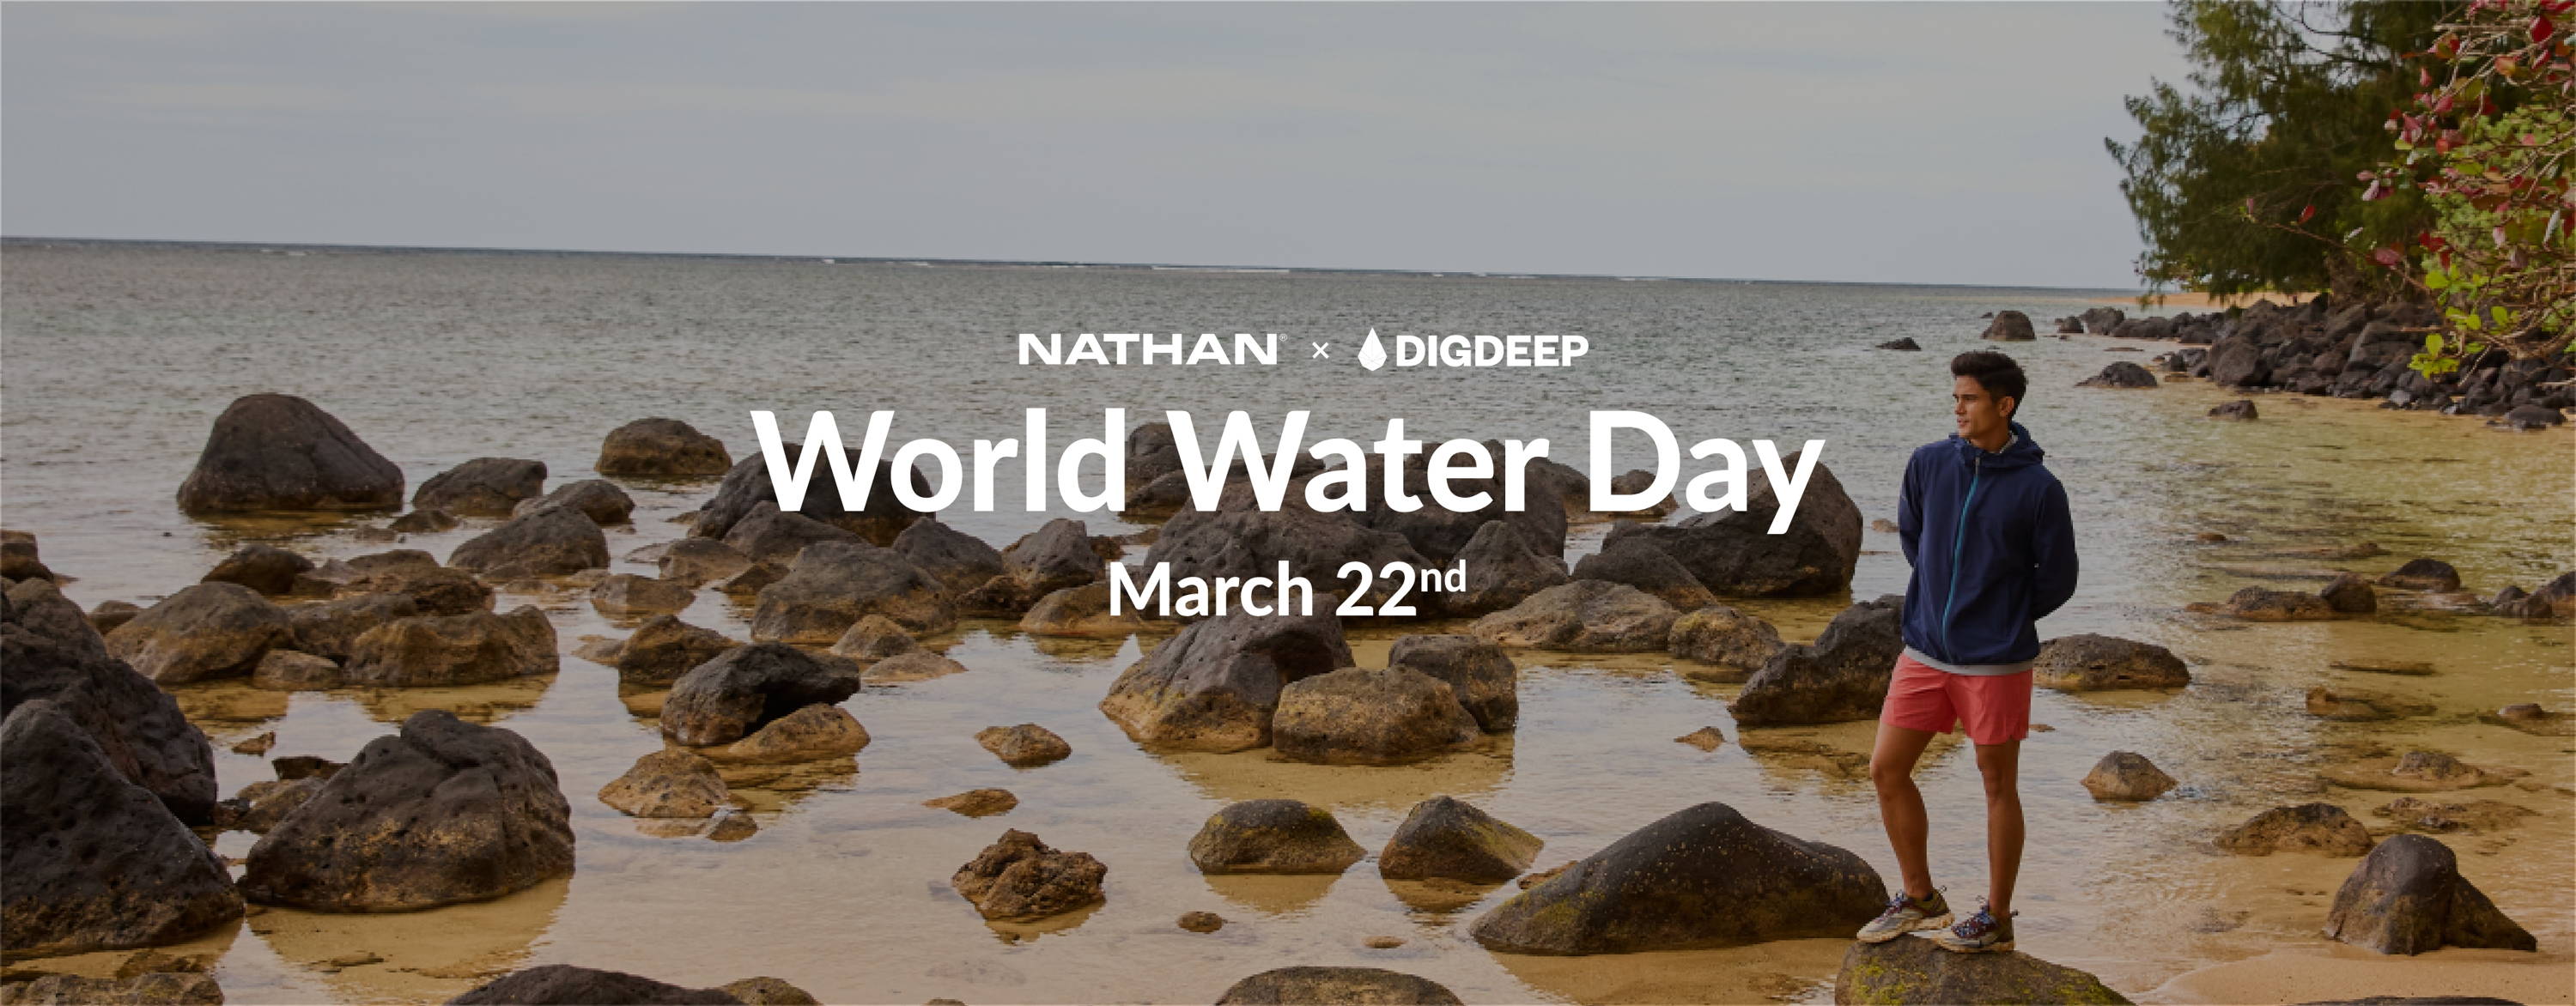 Nathan + DigDeep, World Water Day, March 22nd